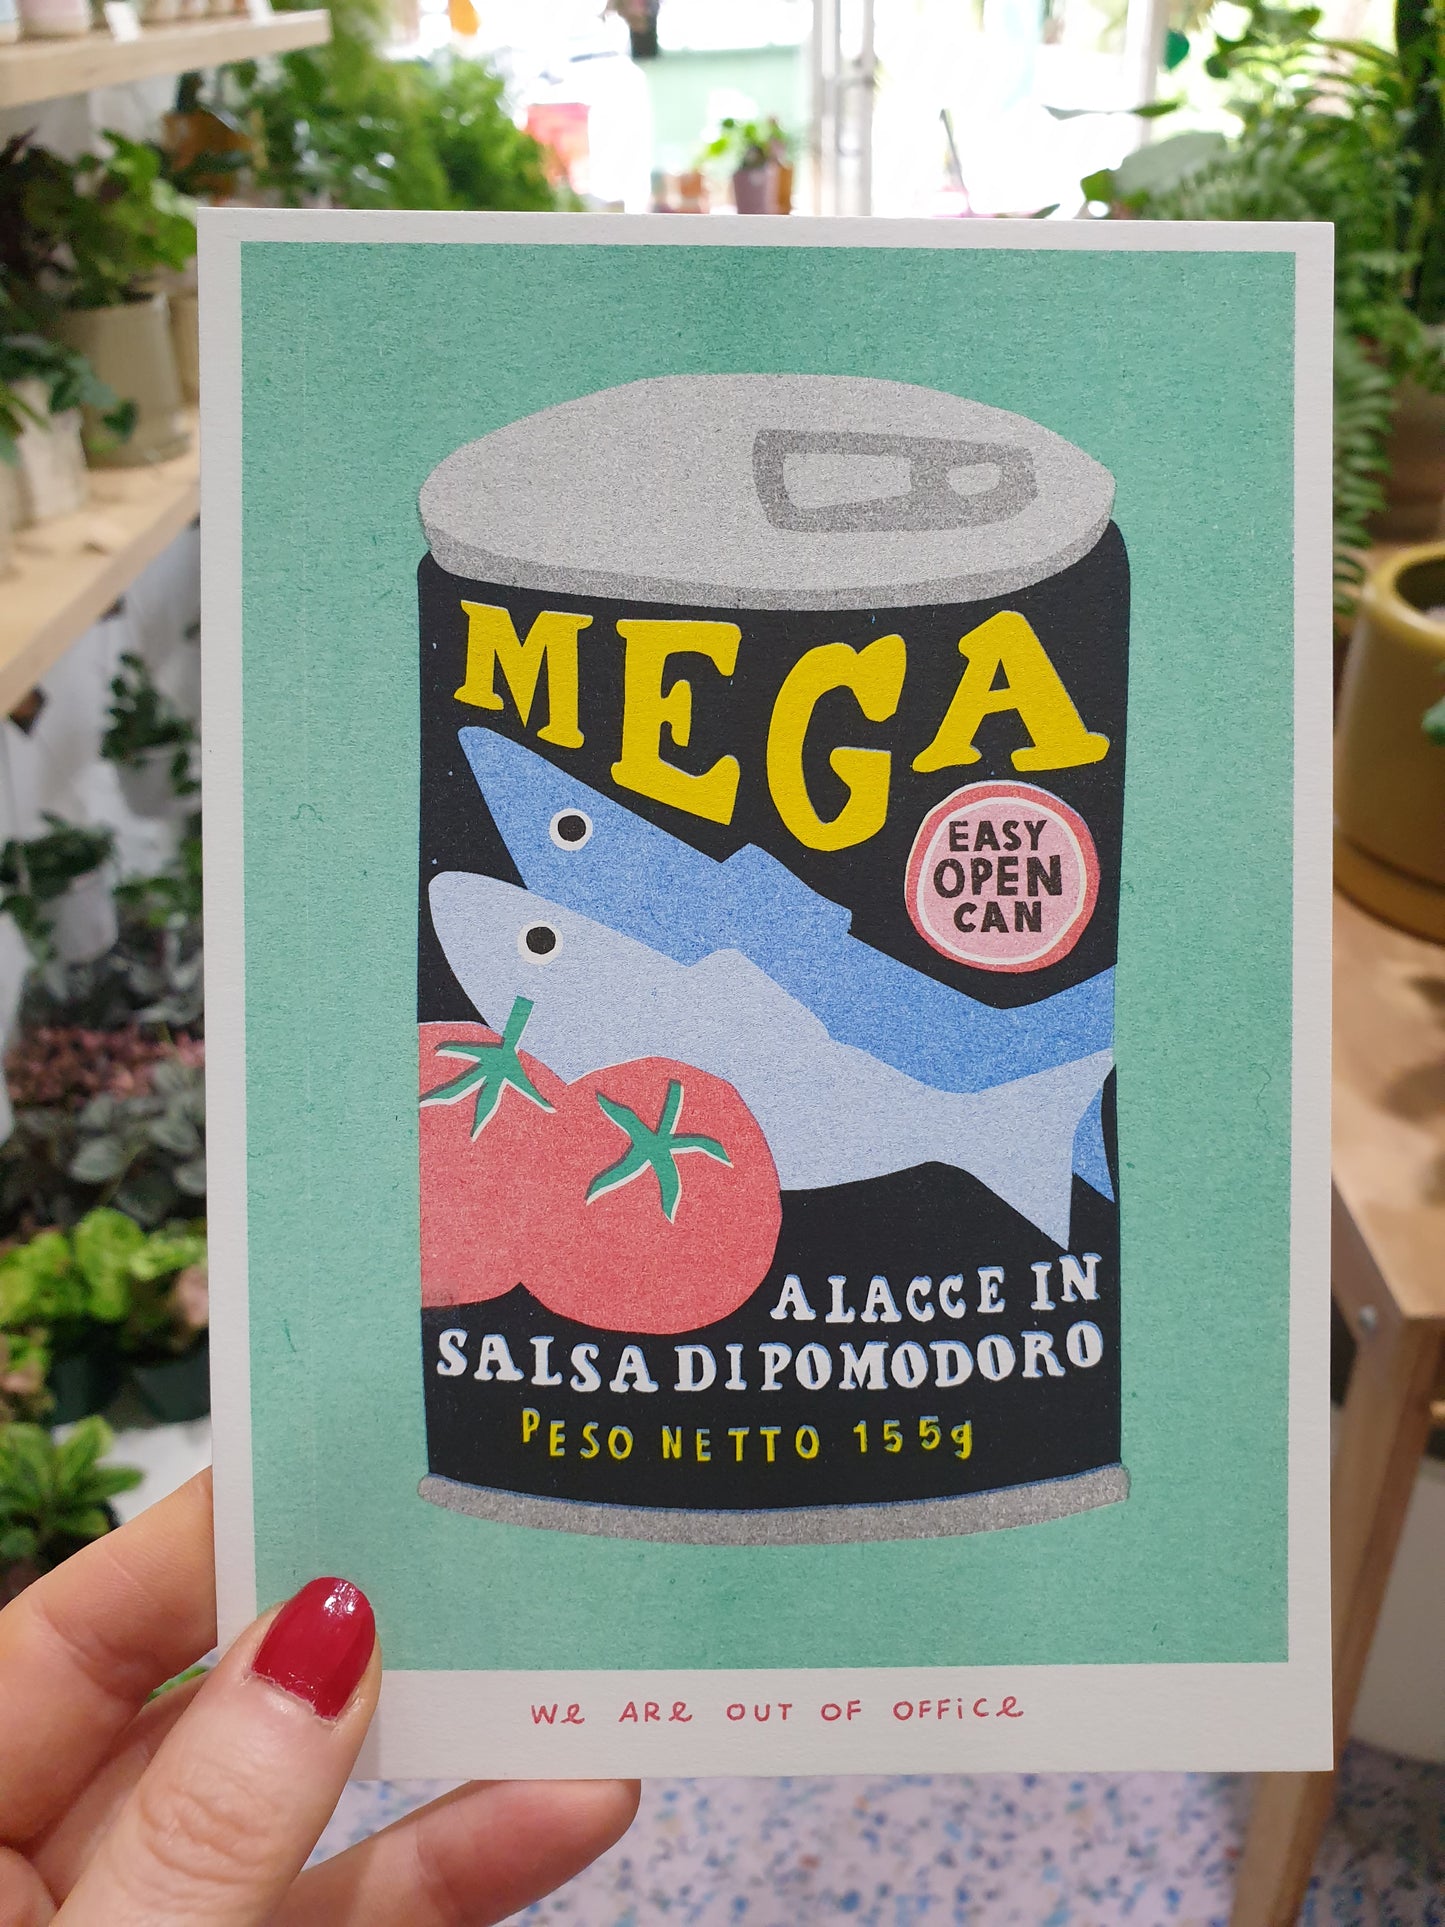 'A can of MEGA sardines' - risograph print by 'We are out of office'